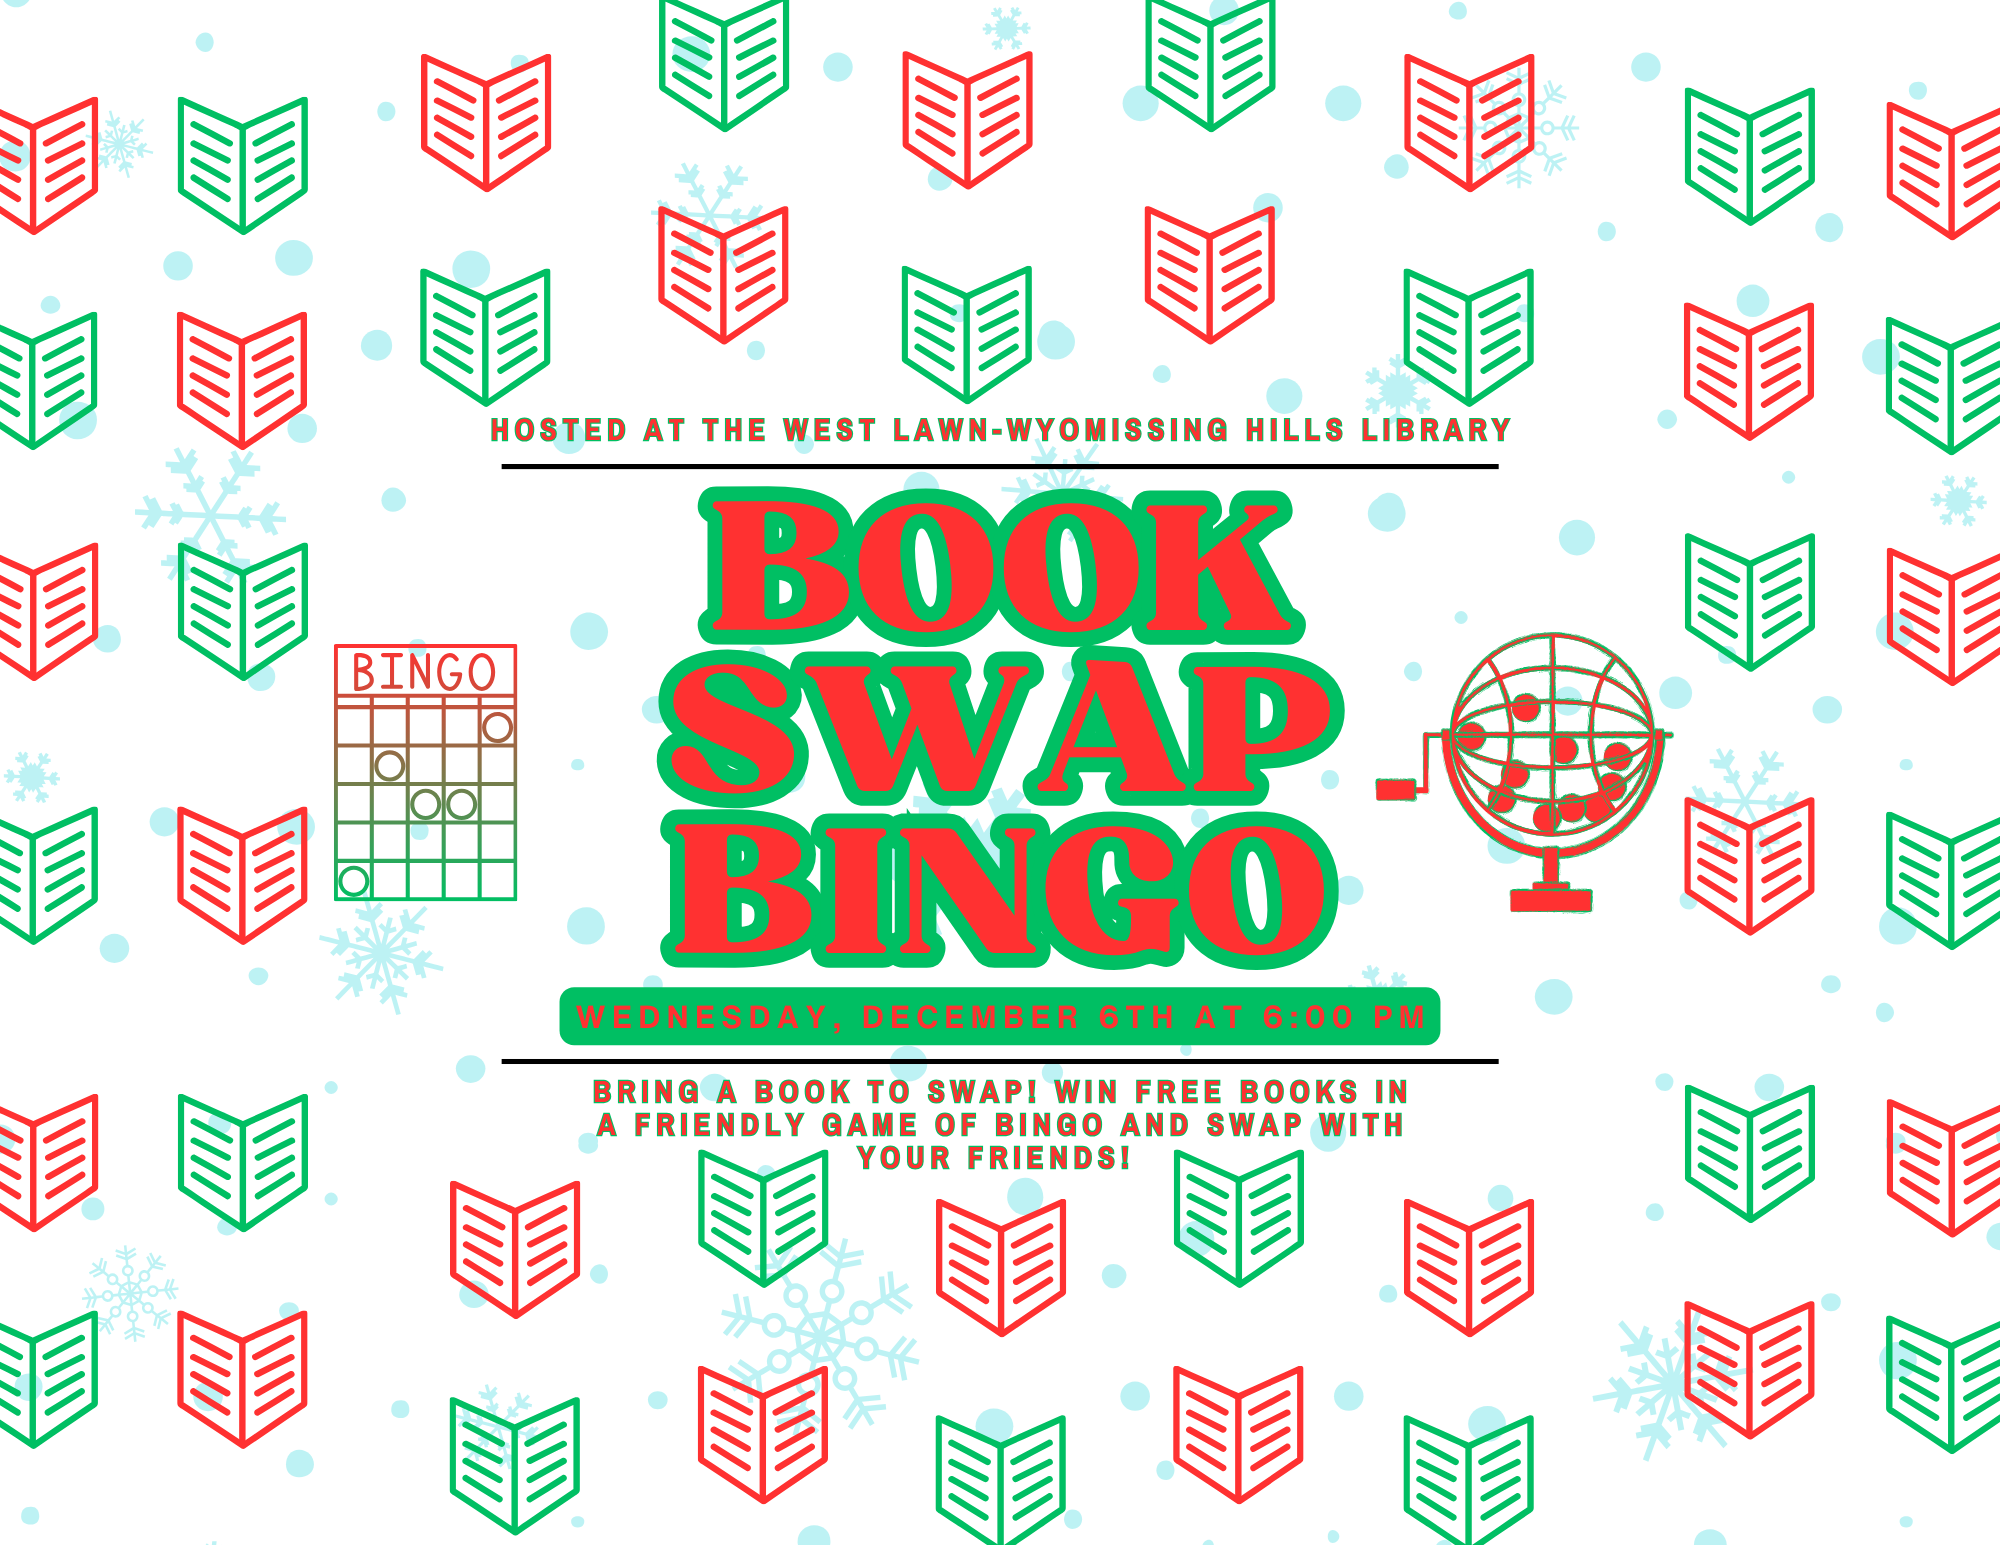 Wednesday, December 6th at 6:00PM  Bring a book to swap! Win free books in a friendly game of bingo and swap with your friends!  Hosted by the Friends of the West Lawn Wyomissing Library